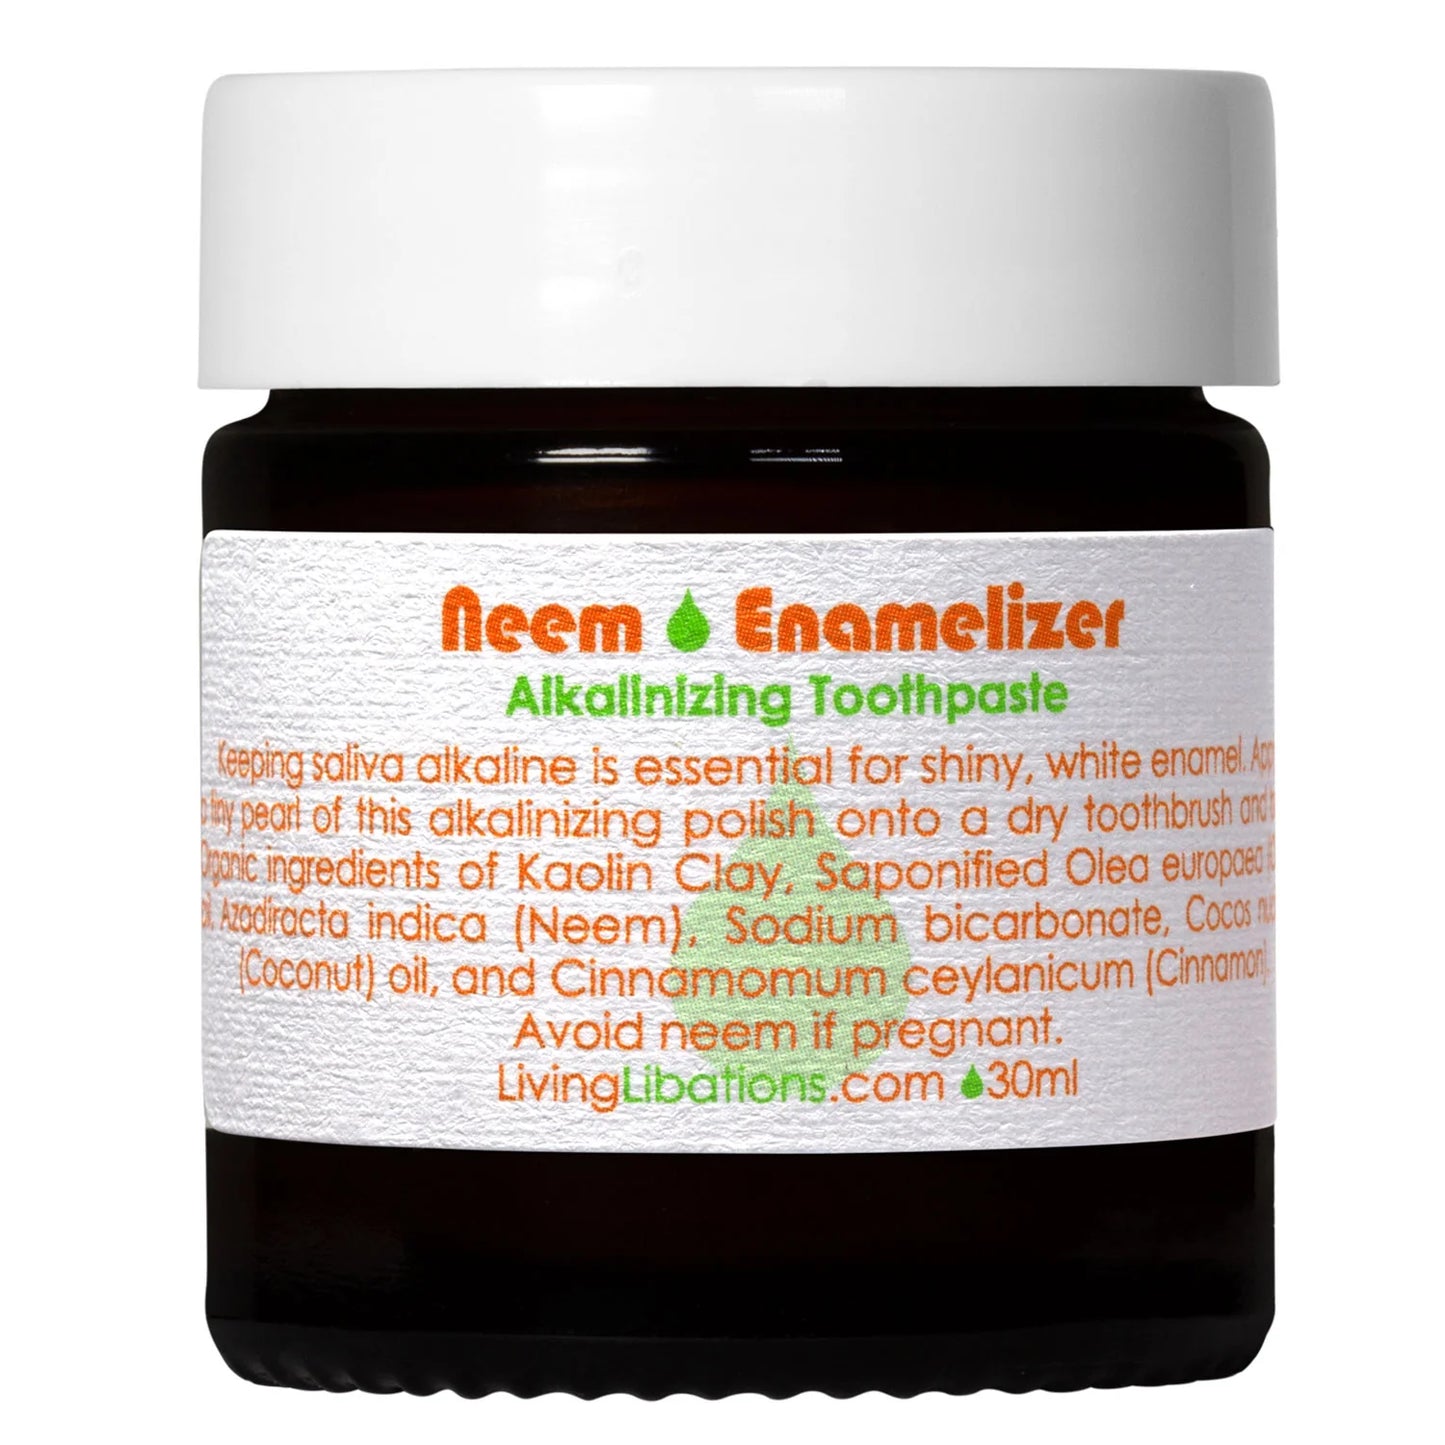 Neem Enamelizer Alkalinizing Toothpaste by Living Libations